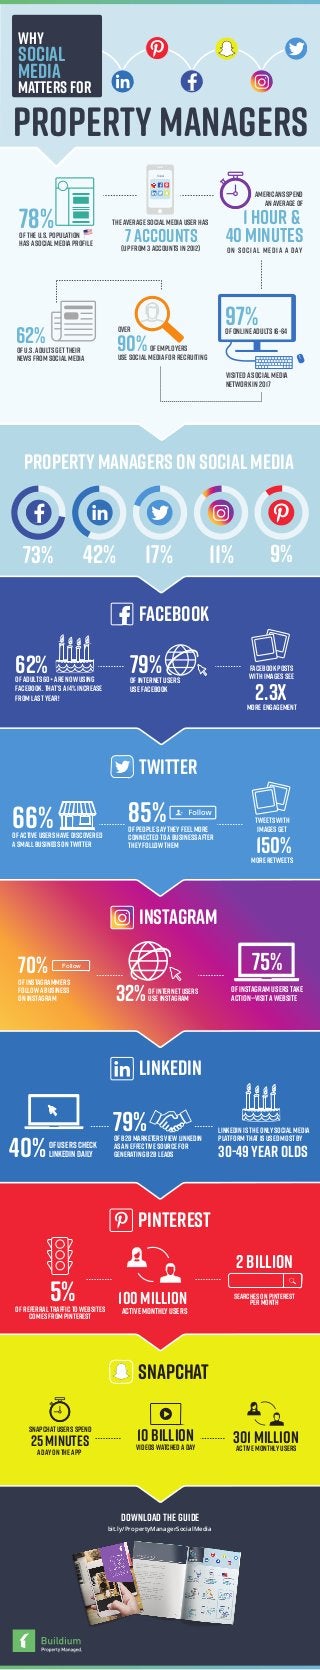 DOWNLOAD THE GUIDE
bit.ly/PropertyManagerSocialMedia
snapchat
pinterest
linkedin
instagram
twitter
tweetswith
images get
more retweets
150%
facebook
79%of internetusers
use Facebook
62%ofadults 60+are nowusing
facebook. That’sa14% increase
from lastyear!
facebookposts
with images see
more engagement
2.3x
66%ofactive users have discovered
a smallbusiness on twitter
85%of people saytheyfeelmore
connected toabusinessafter
theyfollowthem
70%
of instagrammers
followabusiness
on instagram
Follow
32%of internetusers
use instagram
75%
of instagram users take
action—visitawebsite
30-49year olds
linkedin is the onlysocialmedia
platform thatis used mostby
40%of users check
linkedin daily
79%of b2b marketersviewlinkedin
asan effective source for
generating b2b leads
5%of referraltraffic towebsites
comes from pinterest
100 million
active monthlyusers
2 billion
searches on pinterest
per month
snapchatusers spend
adayon theapp
25 minutes videoswatchedaday
10 billion 301 millionactive monthlyusers
propertymanagers on socialmedia
97%
visited asocialmedia
networkin 2017
of online adults 16-64
78%of the u.s. population
hasasocialmediaprofile
7accounts
Social
Theaverage socialmediauser has
(up from 3accounts in 2012)
americans spend
anaverage of
on social media a day
1 hour &
40 minutes
of u.s.adults gettheir
news from socialmedia
62%
why
social
media
matters for
over
use socialmediaFor recruiting
90%of employers
property managers
73% 42% 17% 11% 9%
 